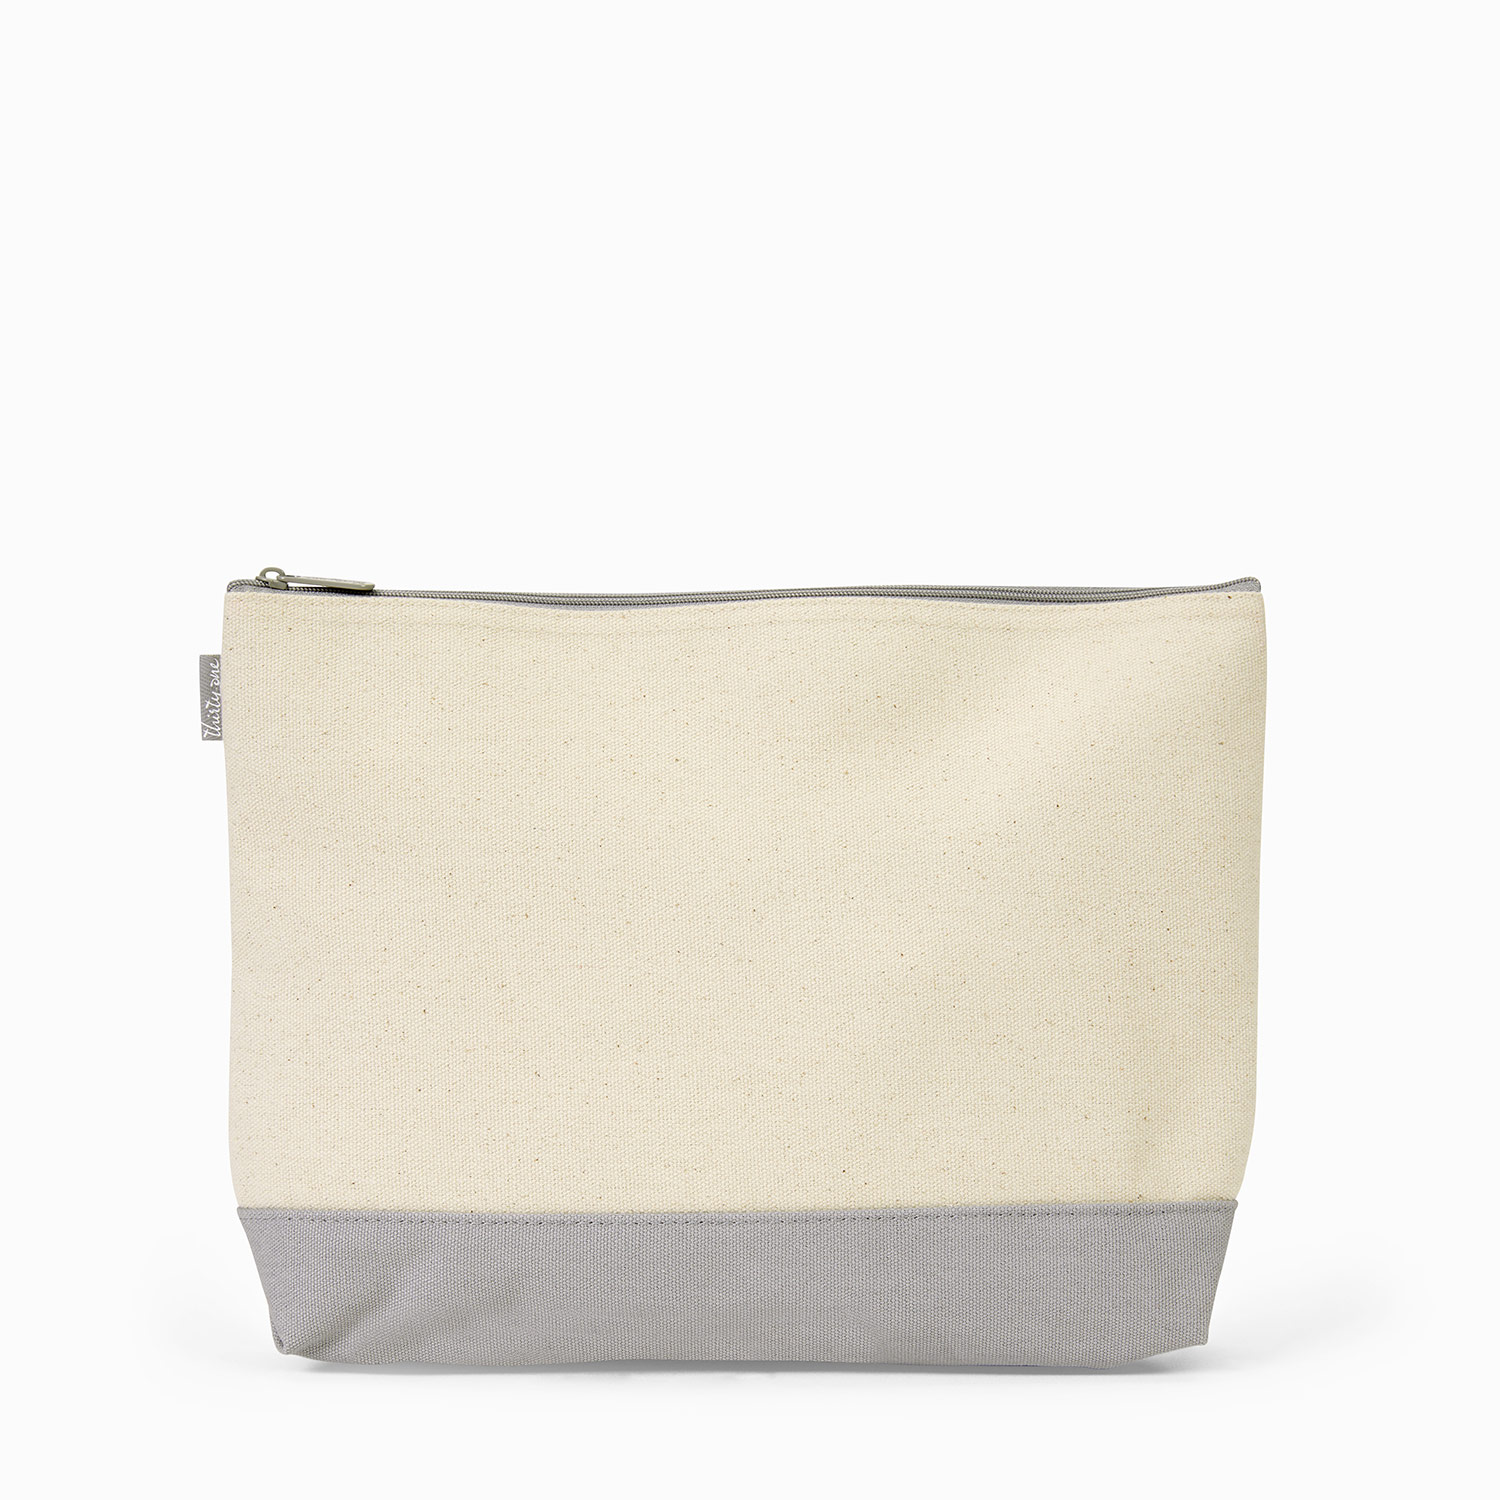 Whisper Grey Colorblock - Canvas Zipper Pouch - Thirty-One Gifts -  Affordable Purses, Totes & Bags